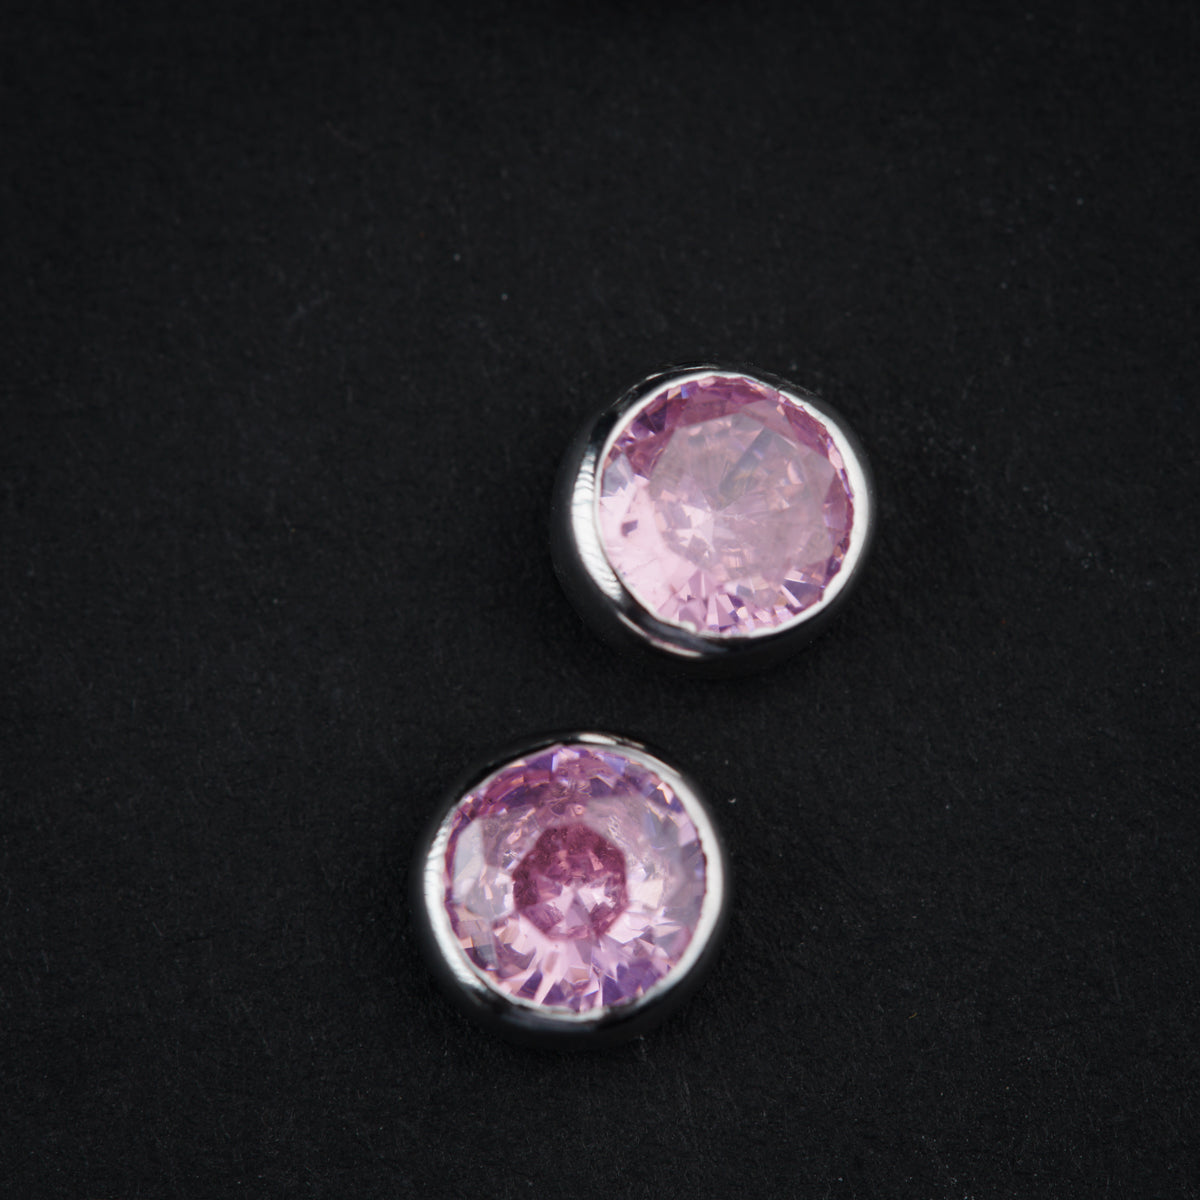 a pair of pink stones sitting on top of a black surface